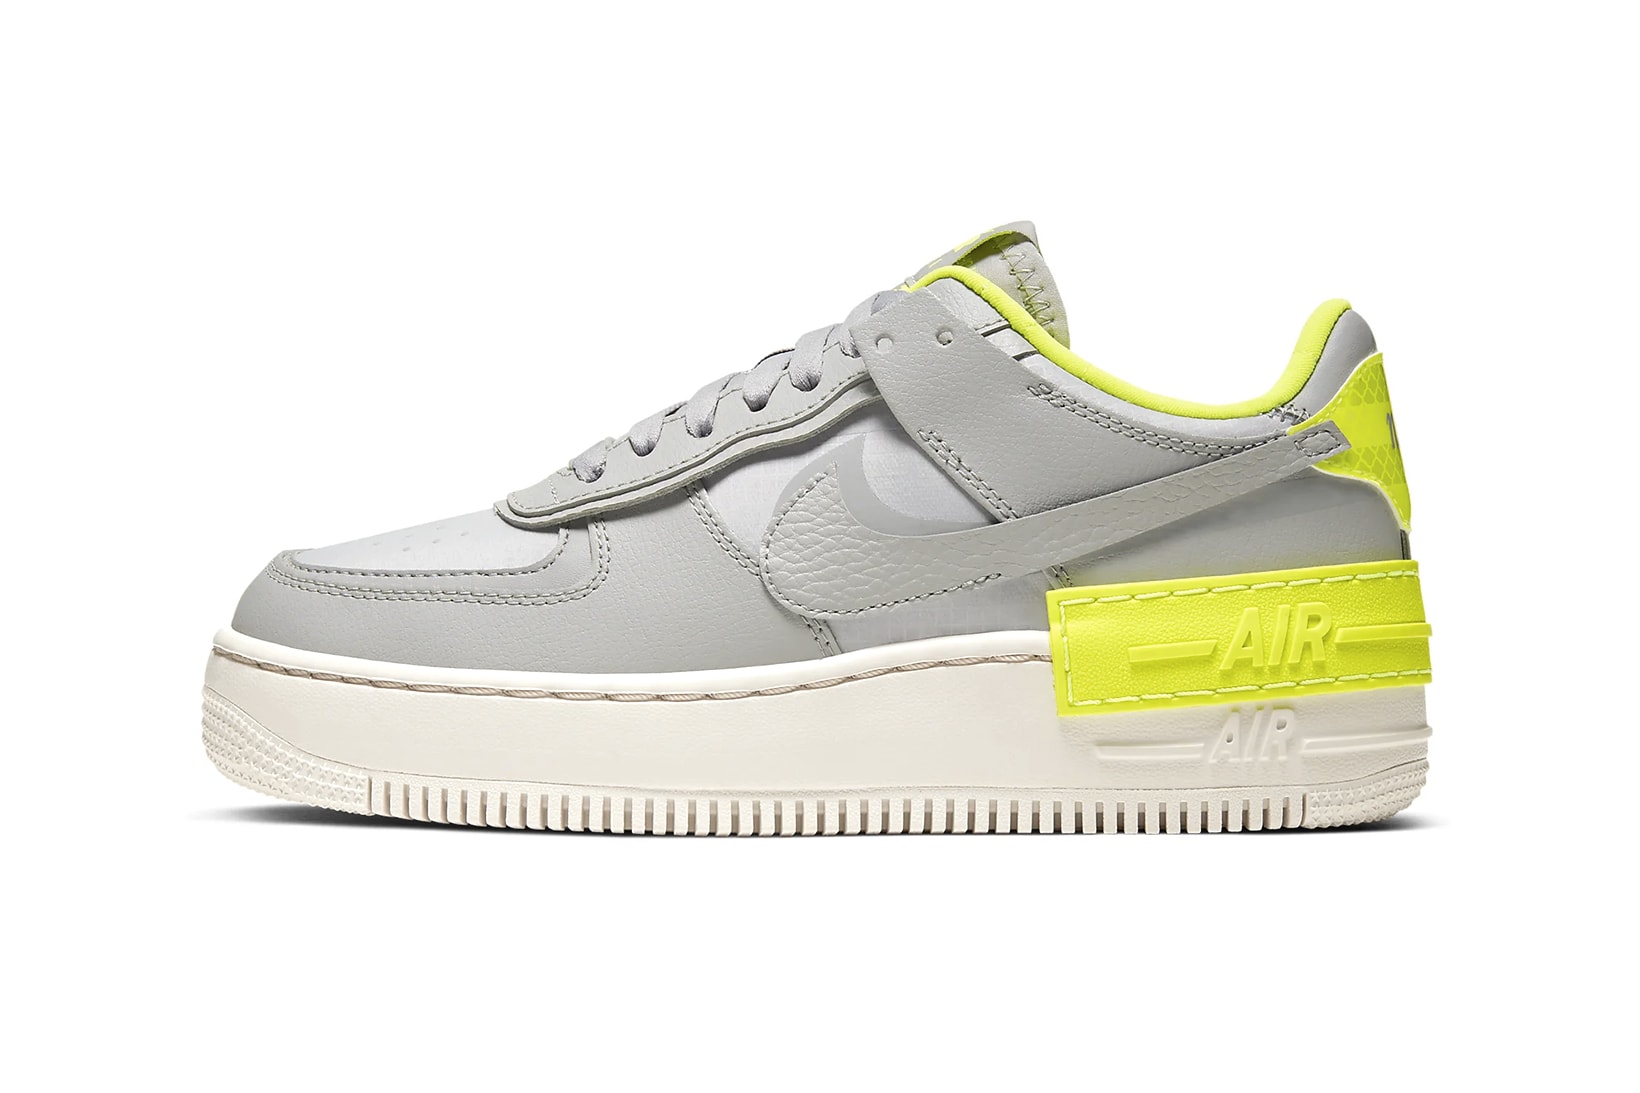 AW LAB - Nike Air Force 1 Shadow in highlighter yellow comes in at